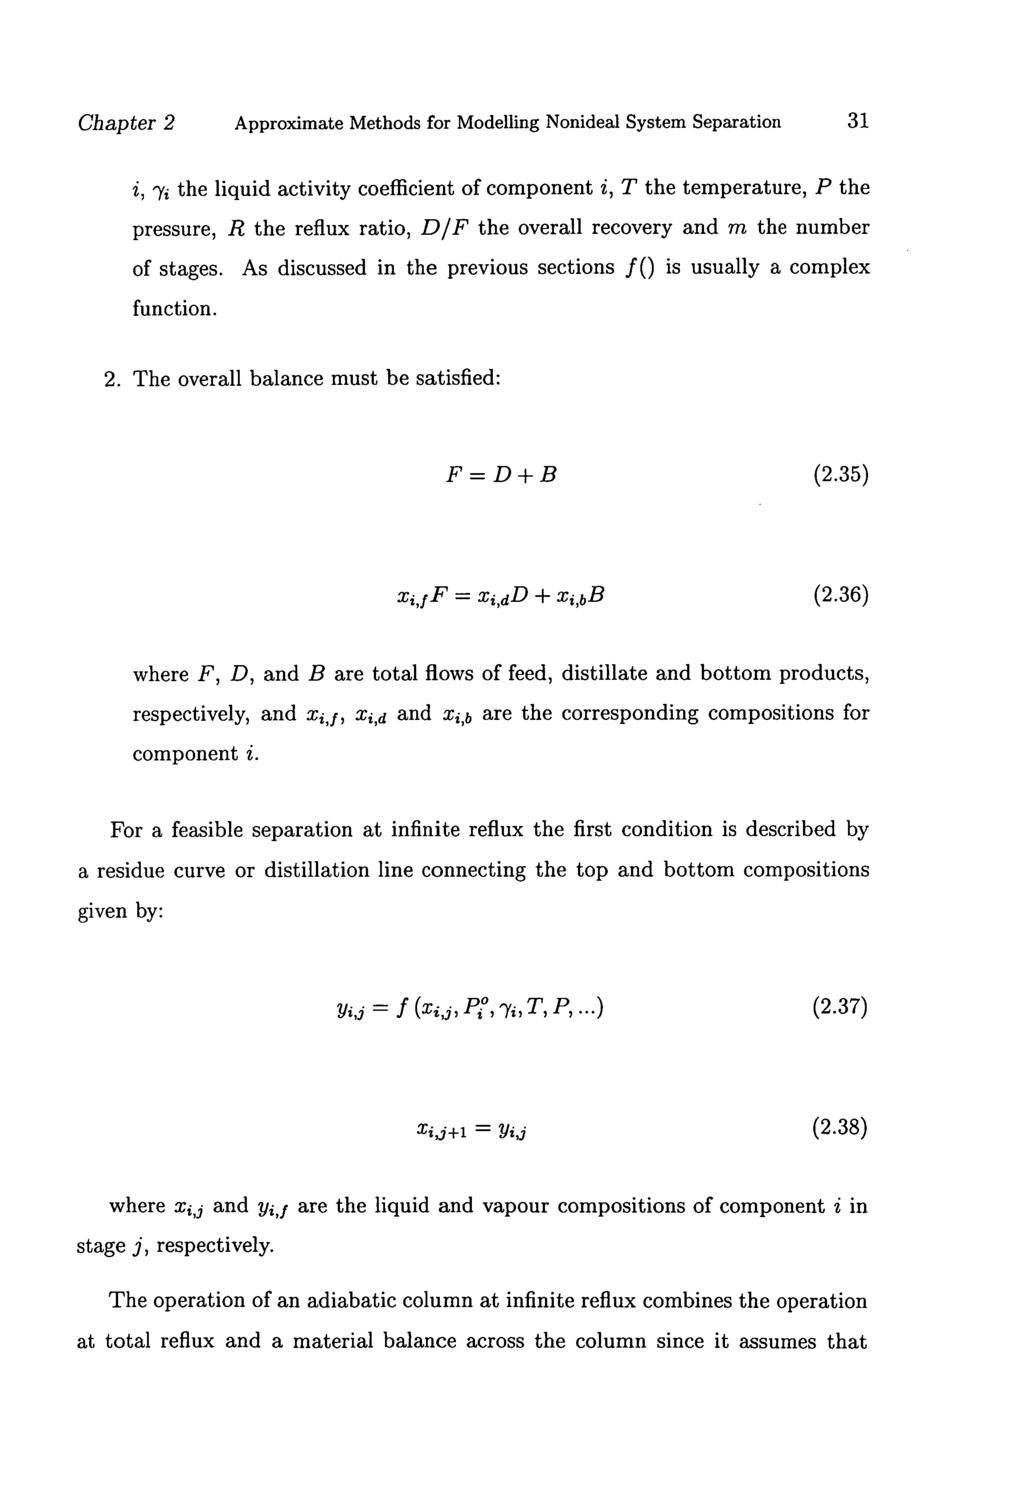 Chapter 2 Approximate Methods for Modelling Nonideal System Separation 31 i, -yj the liquid activity coefficient of component i, T the temperature, P the pressure, R the refiux ratio, D/F the overall